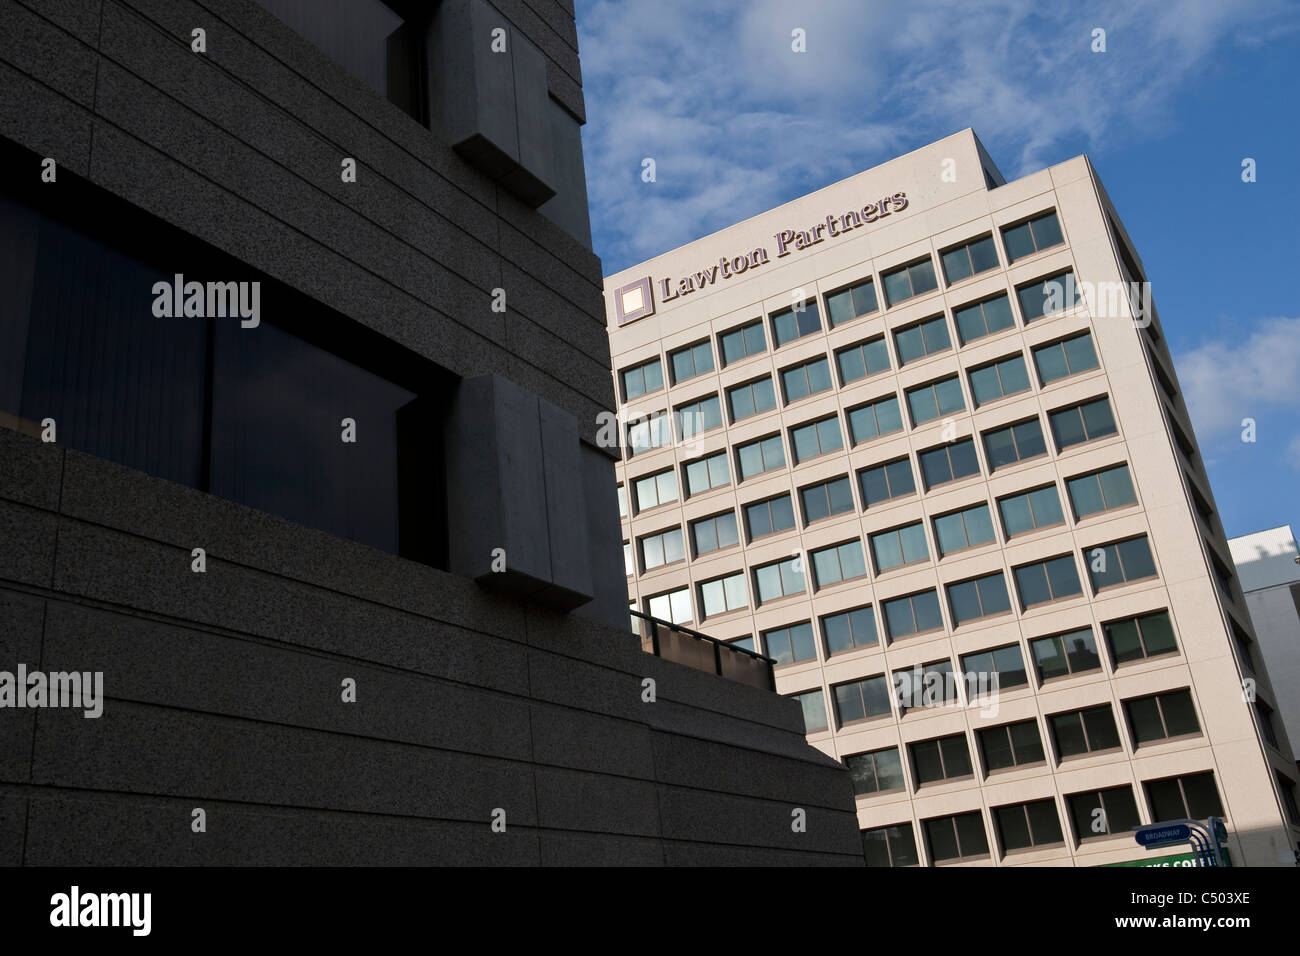 Lawton Partners Financial Planning Services headquarters is pictured in Winnipeg Sunday May 22, 2011. Stock Photo